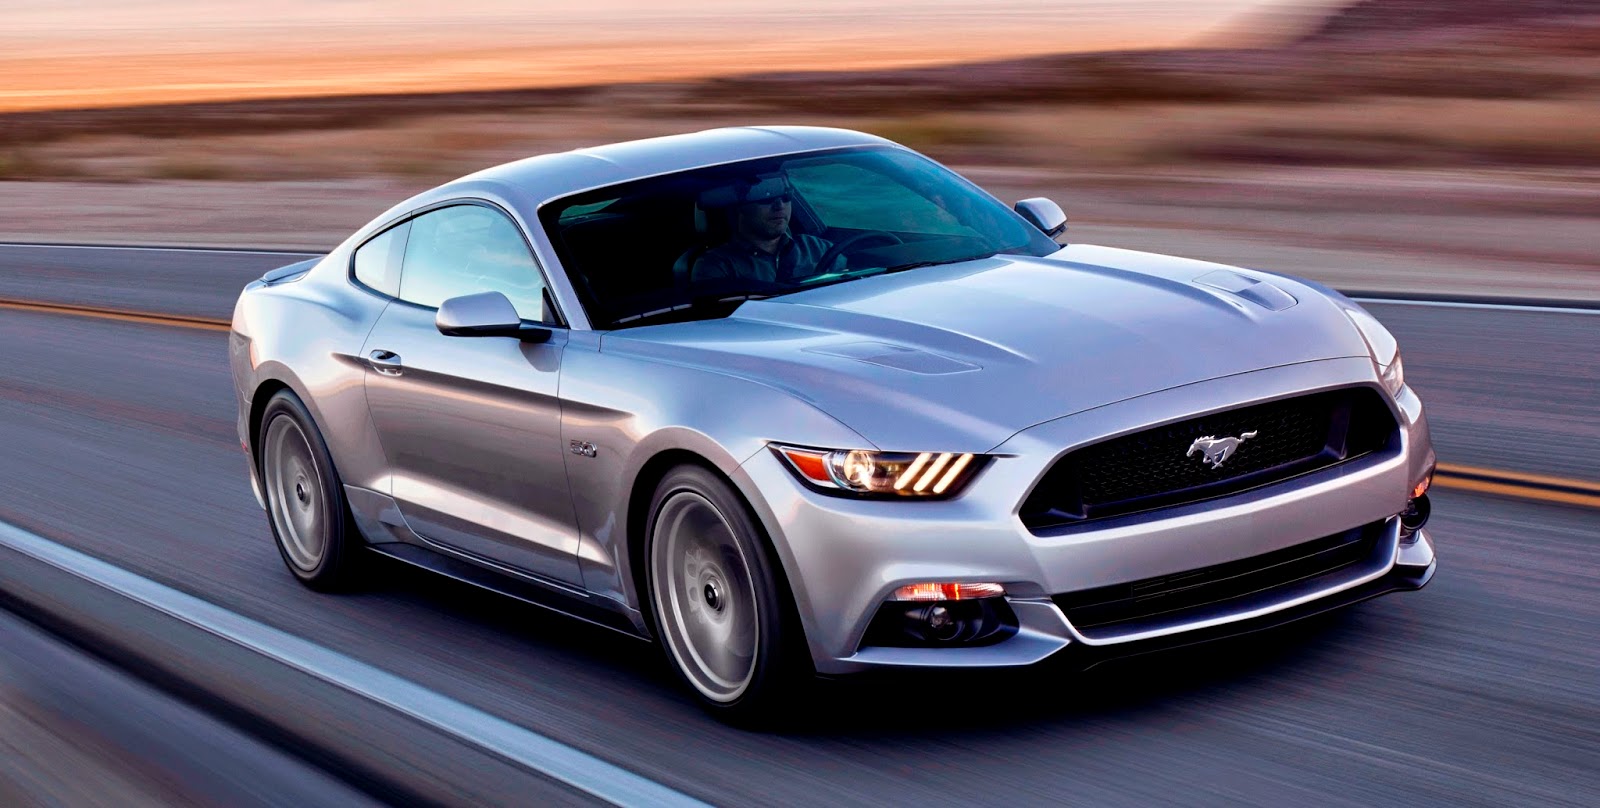 2015 Ford Mustang premium GT specs and price - Best Car Pics